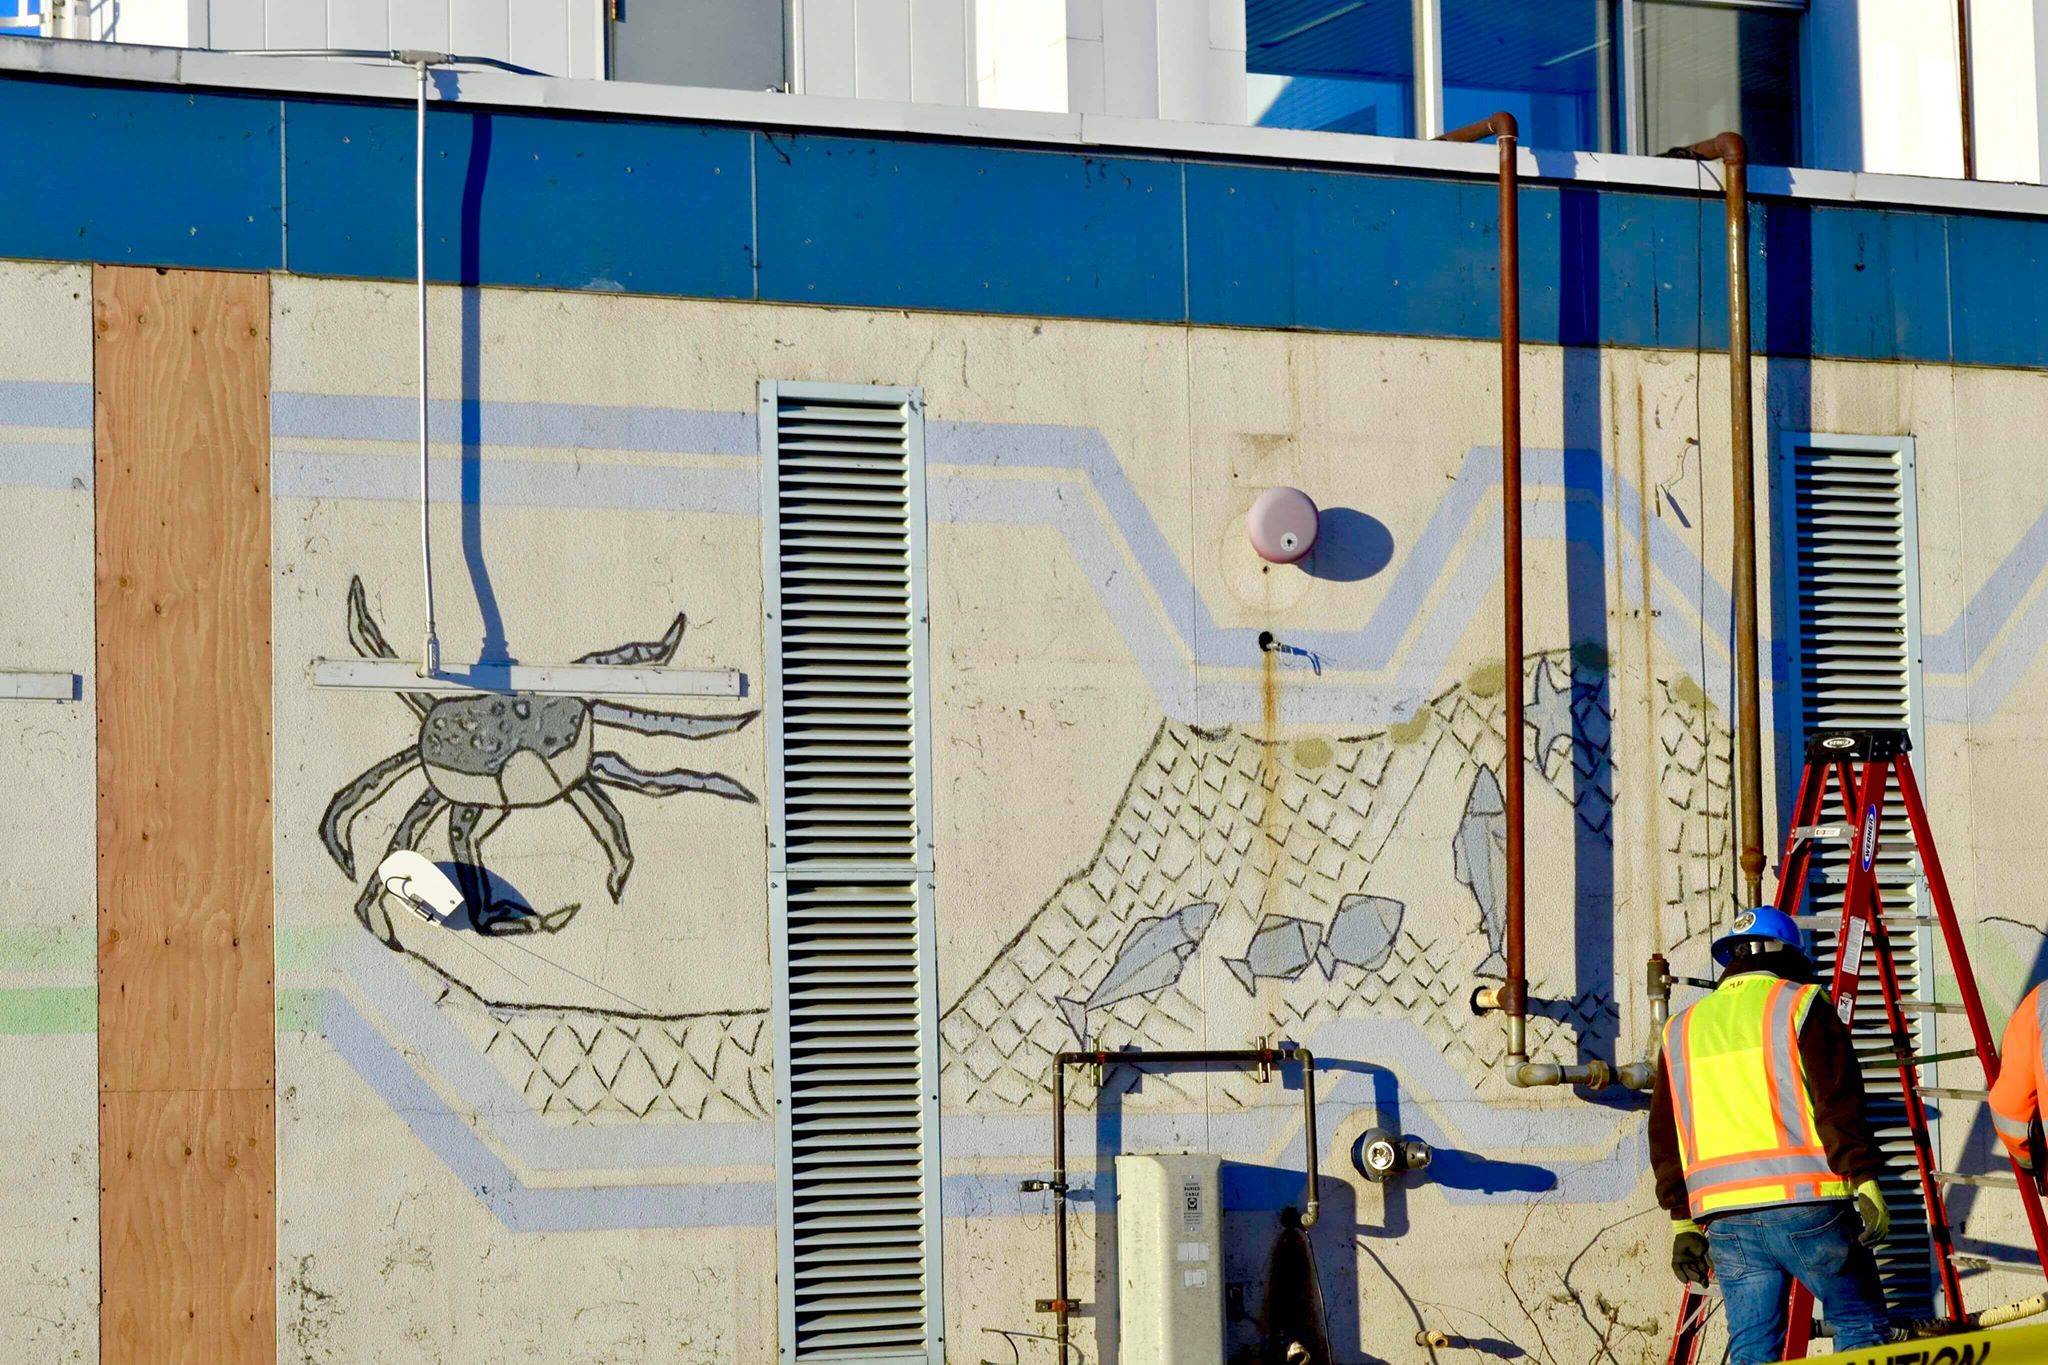 Construction crews work at the Kenai Municipal Airport on Tuesday afternoon. After workers removed siding from the facade, a mural with iconic Kenai images like fishing nets, the St. Nicholas Russian Orthodox chapel and a dog musher, was revealed. (Photo by Victoria Petersen/Peninsula Clarion)